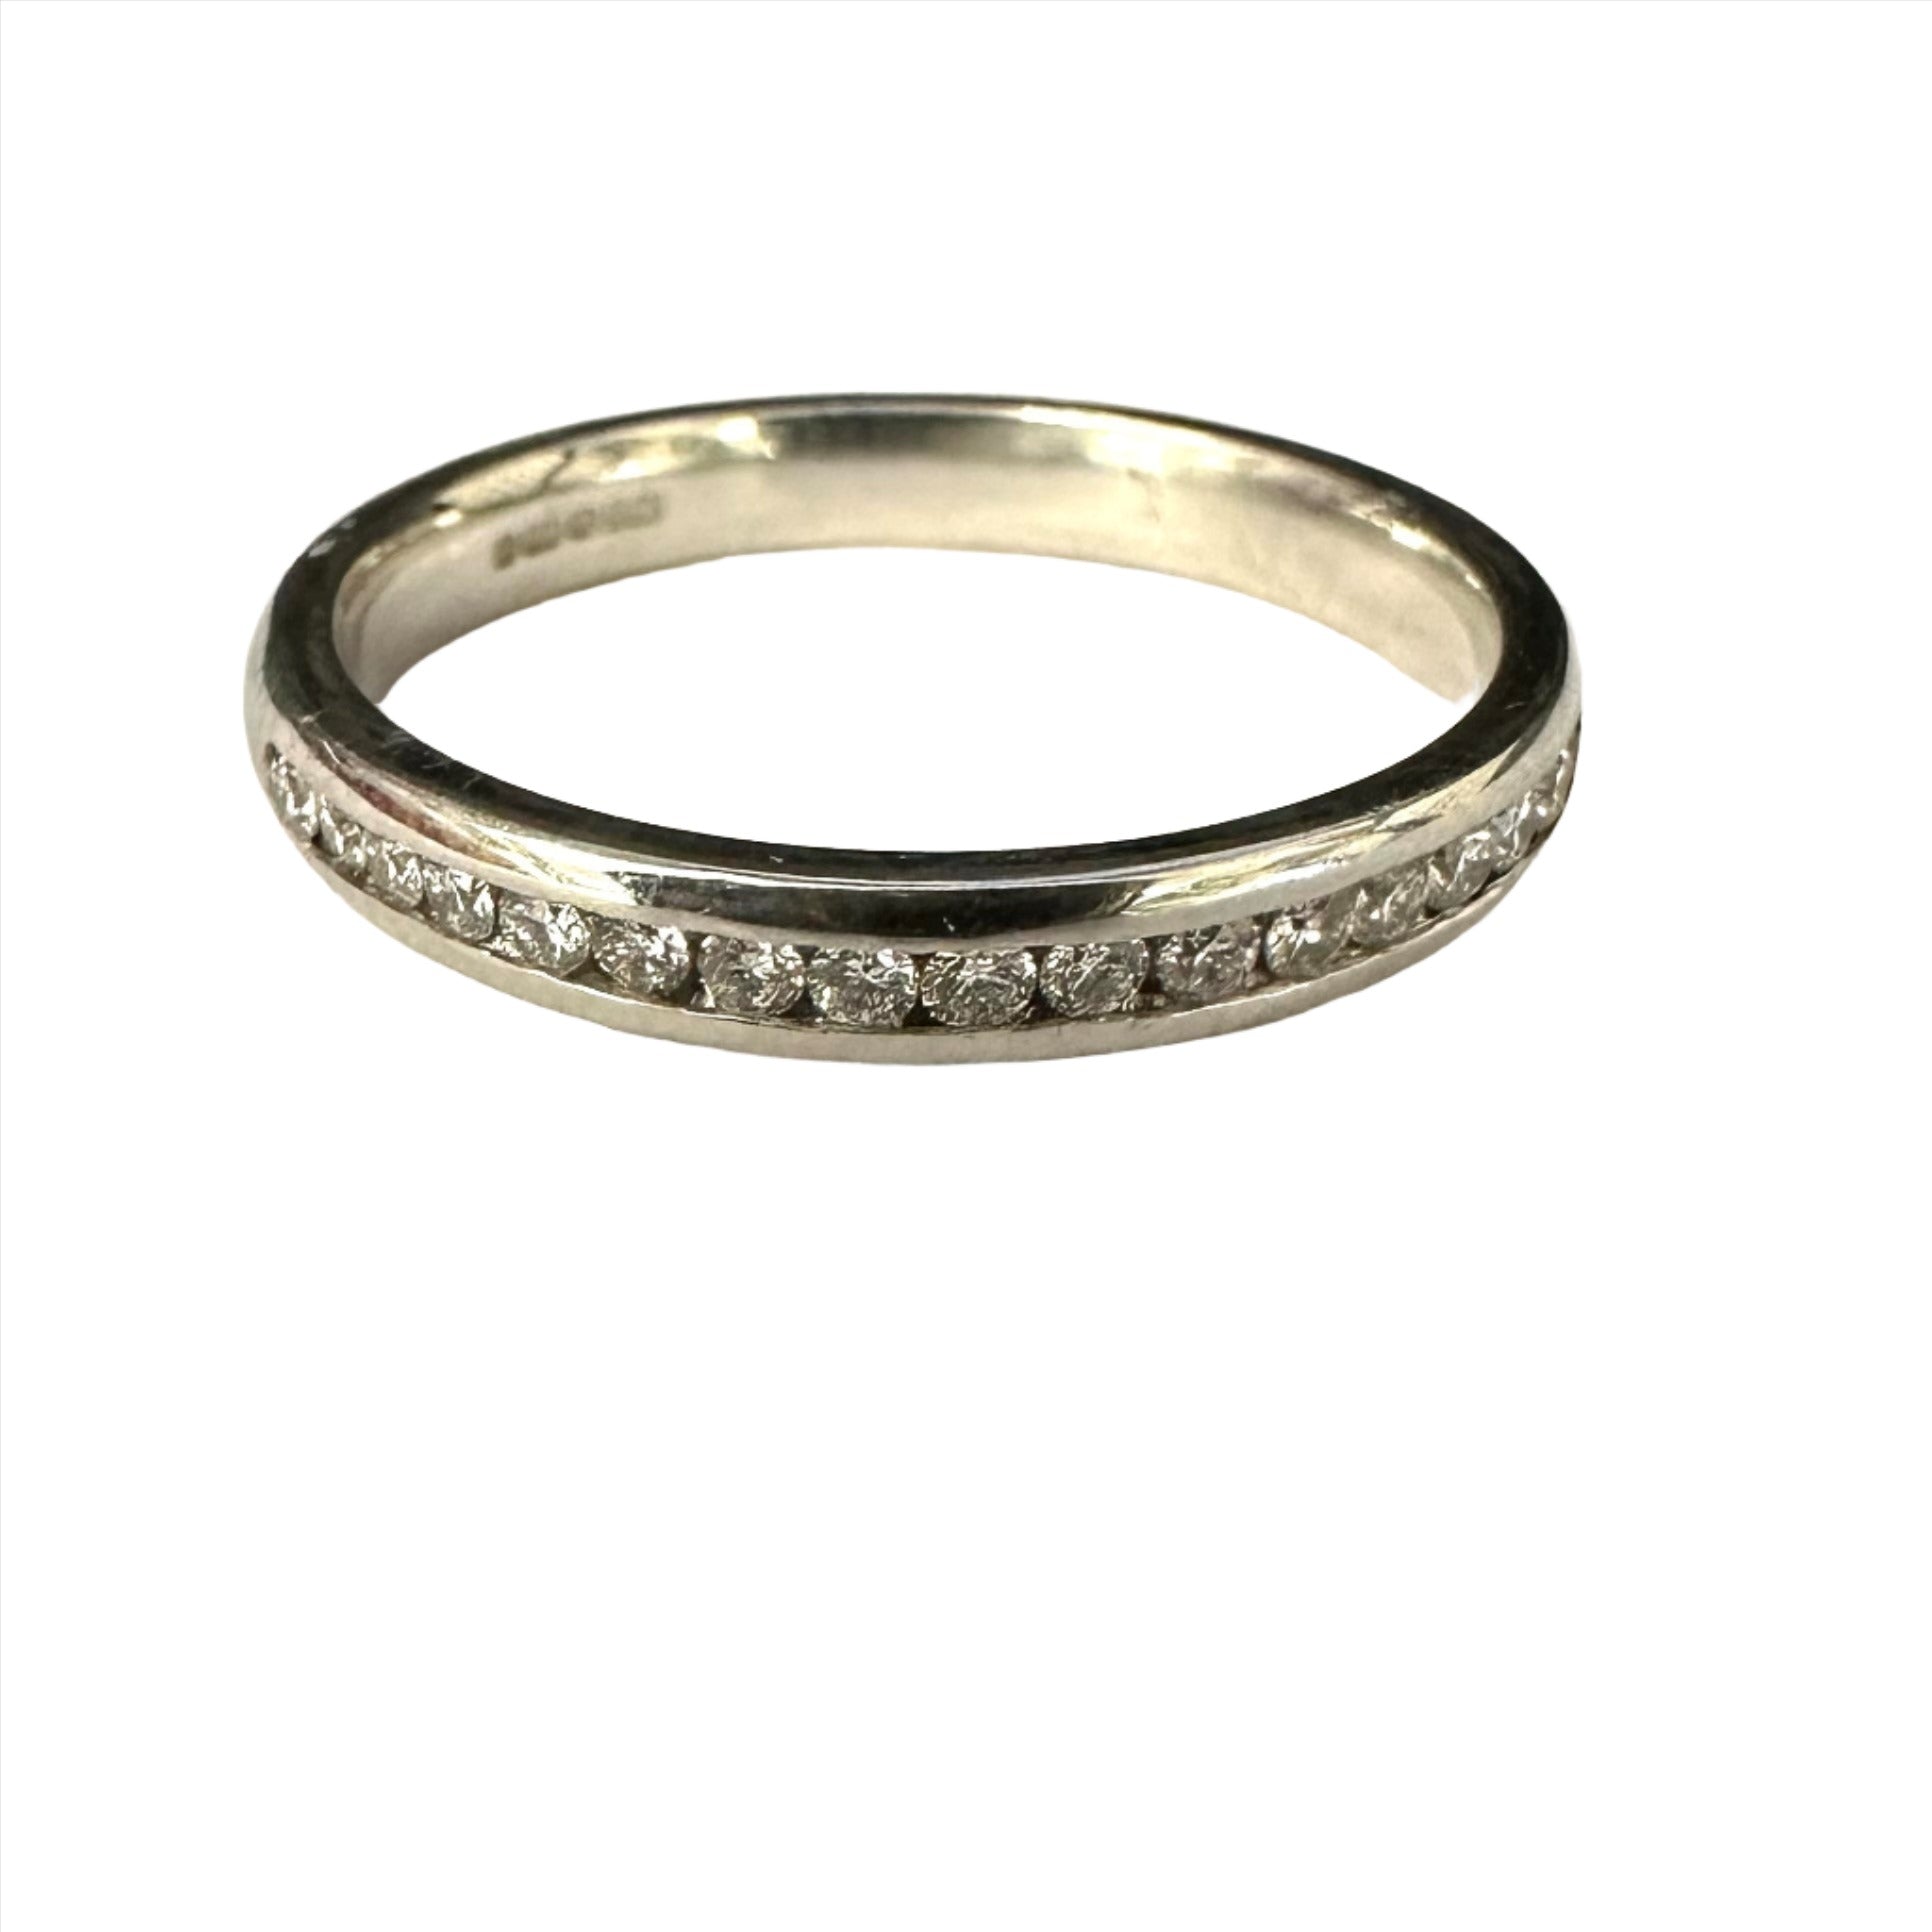 Exquisite White Gold Band with 30% Diamond Cover